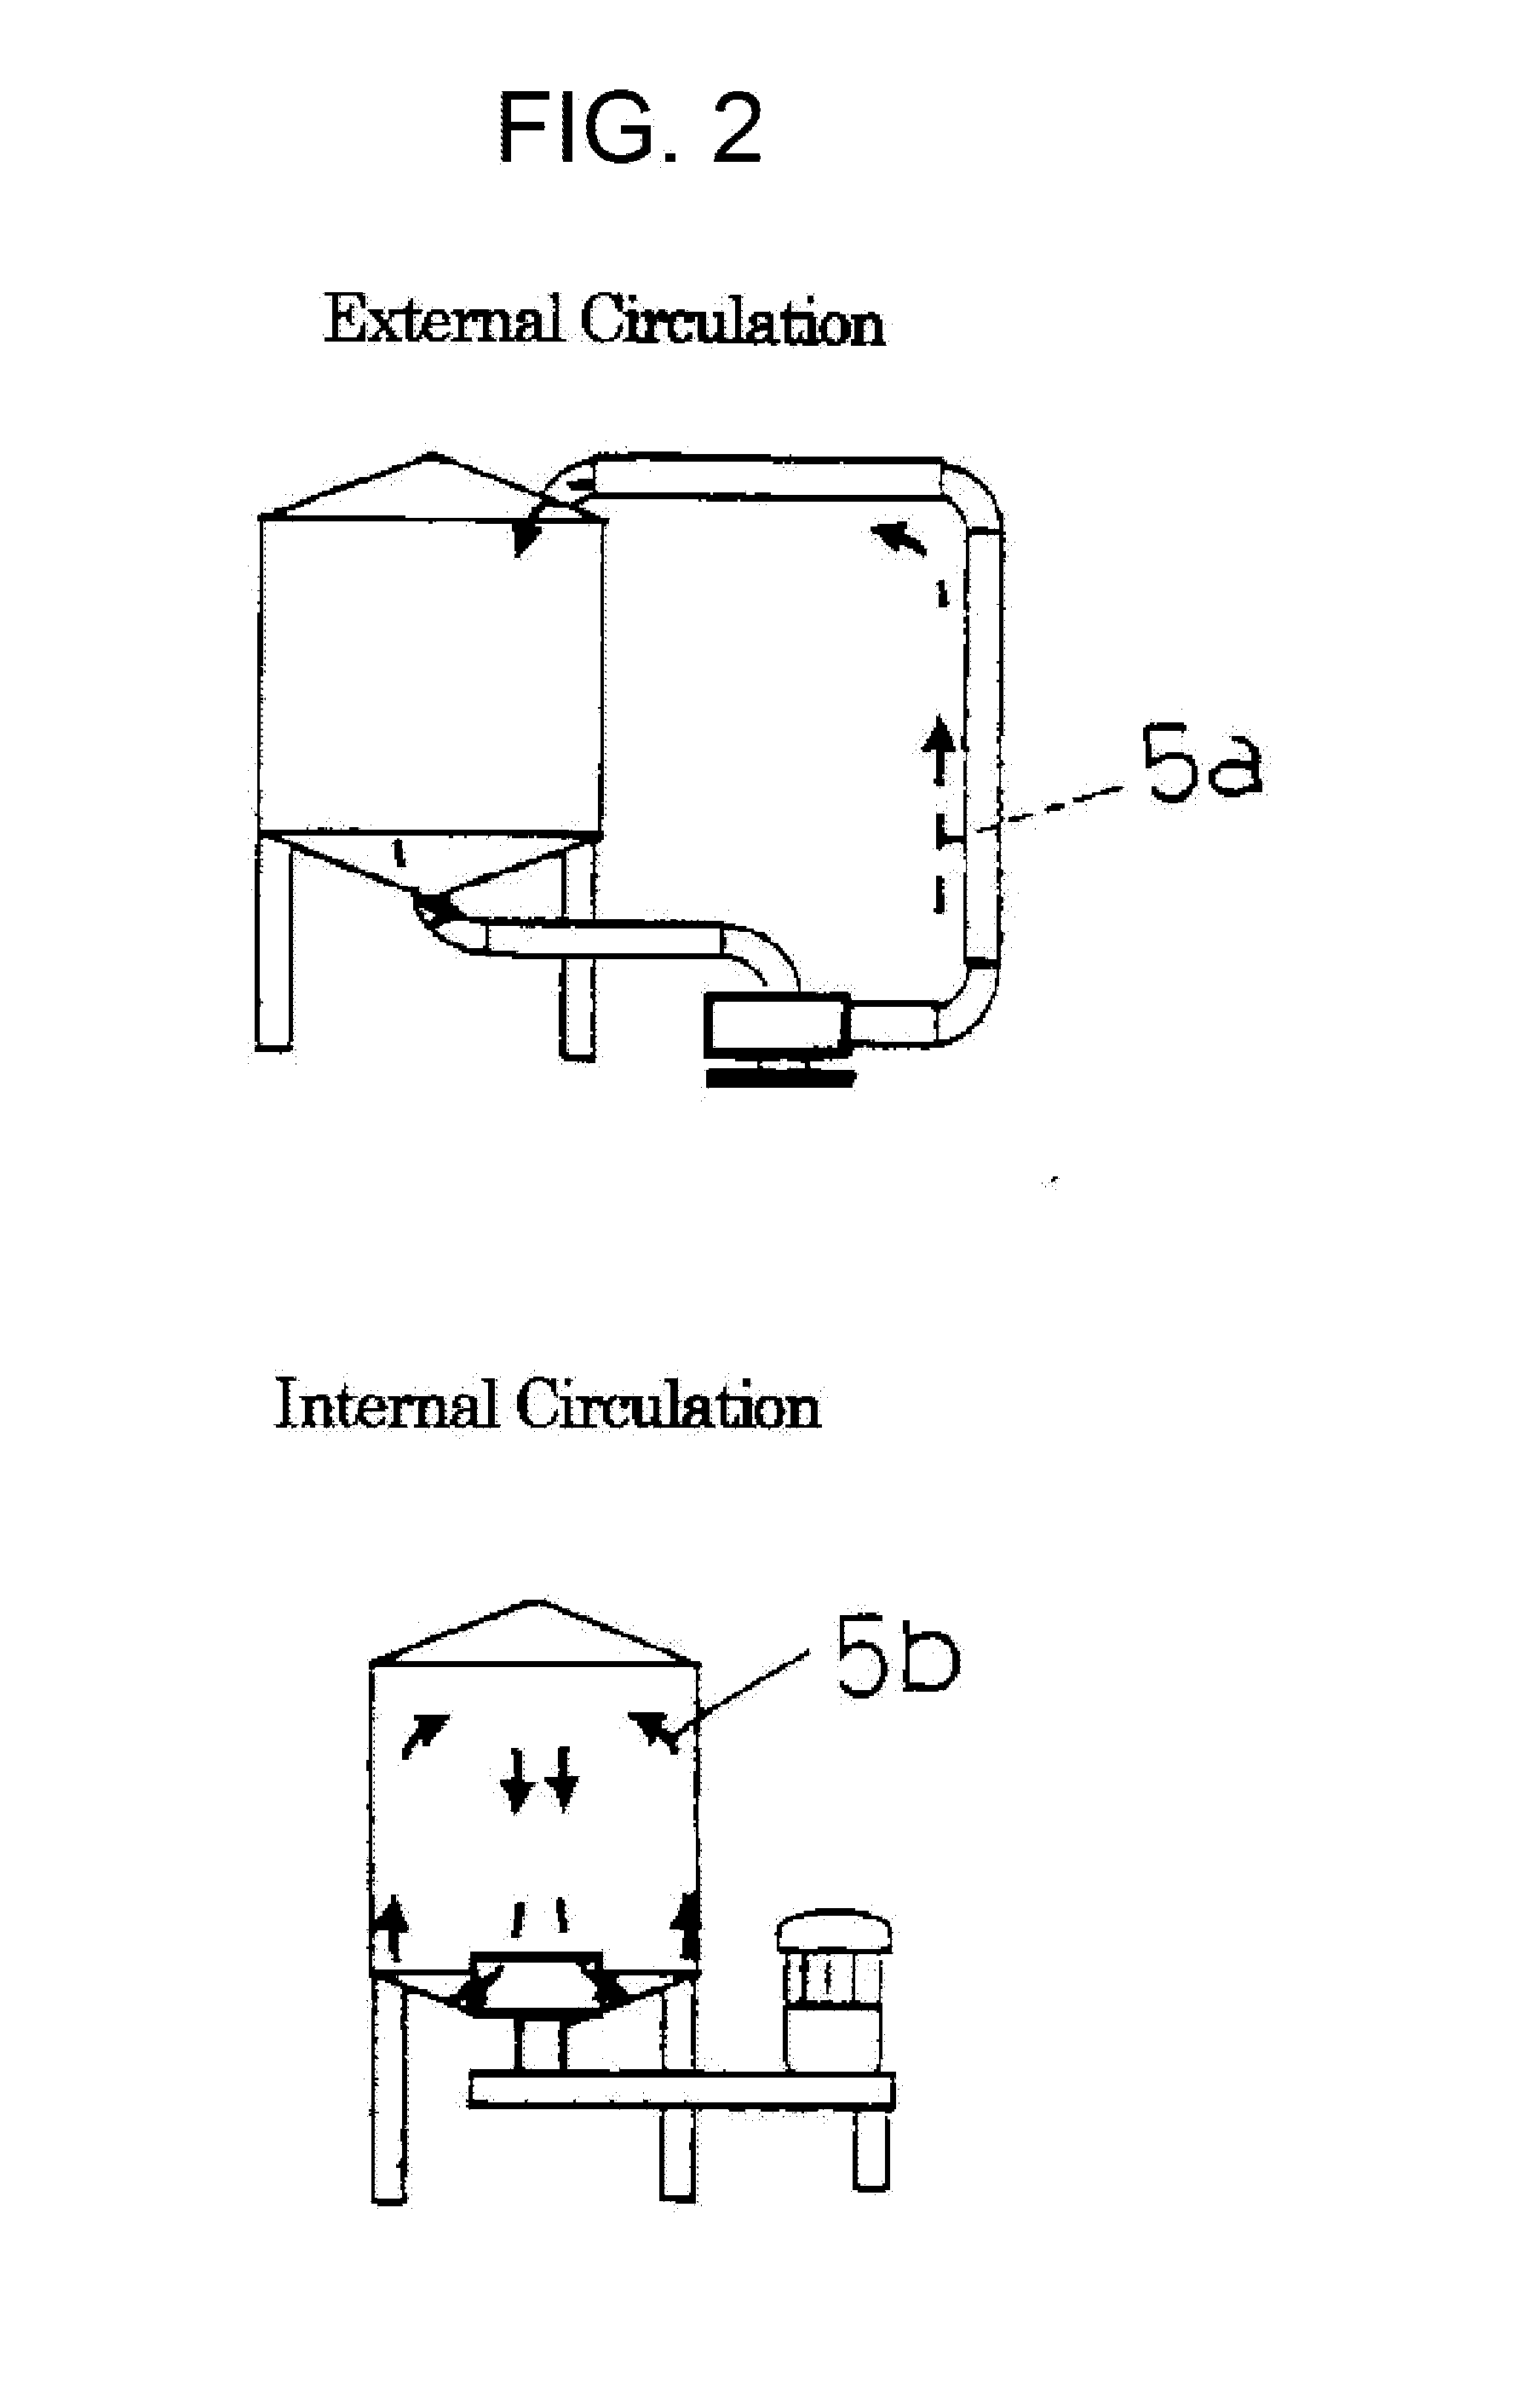 Particle size breakup apparatus